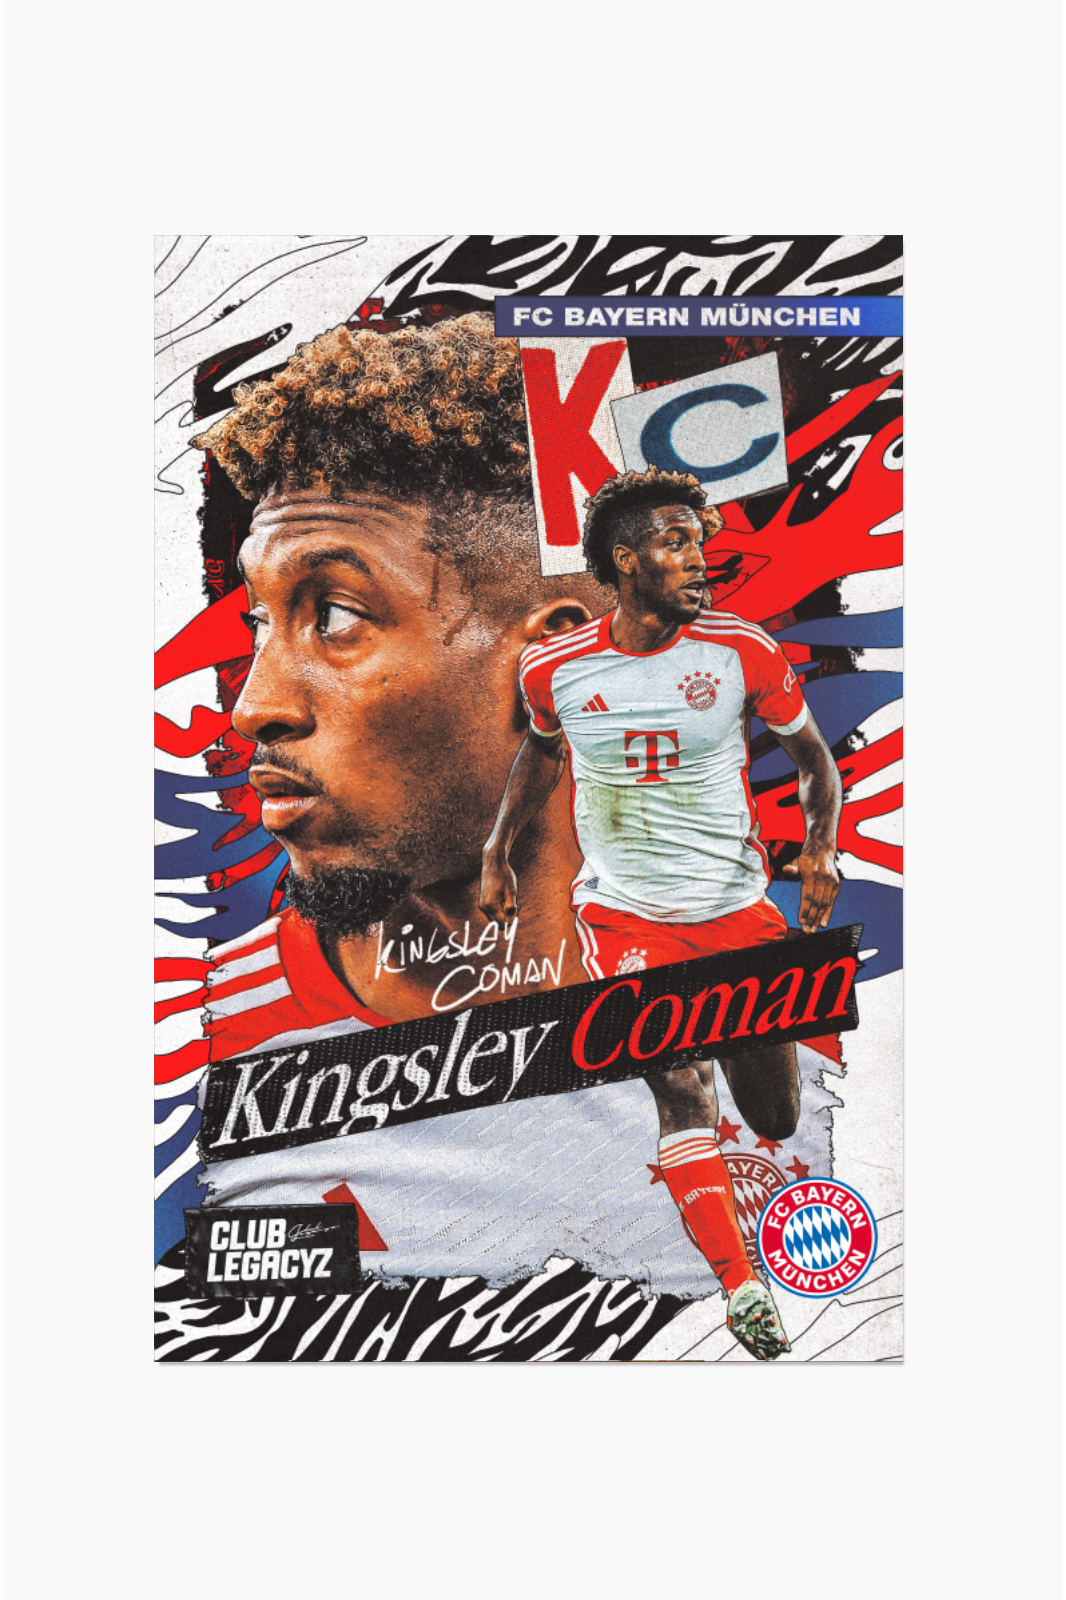 FC Bayern München - Kingsley Coman Poster limited to 100